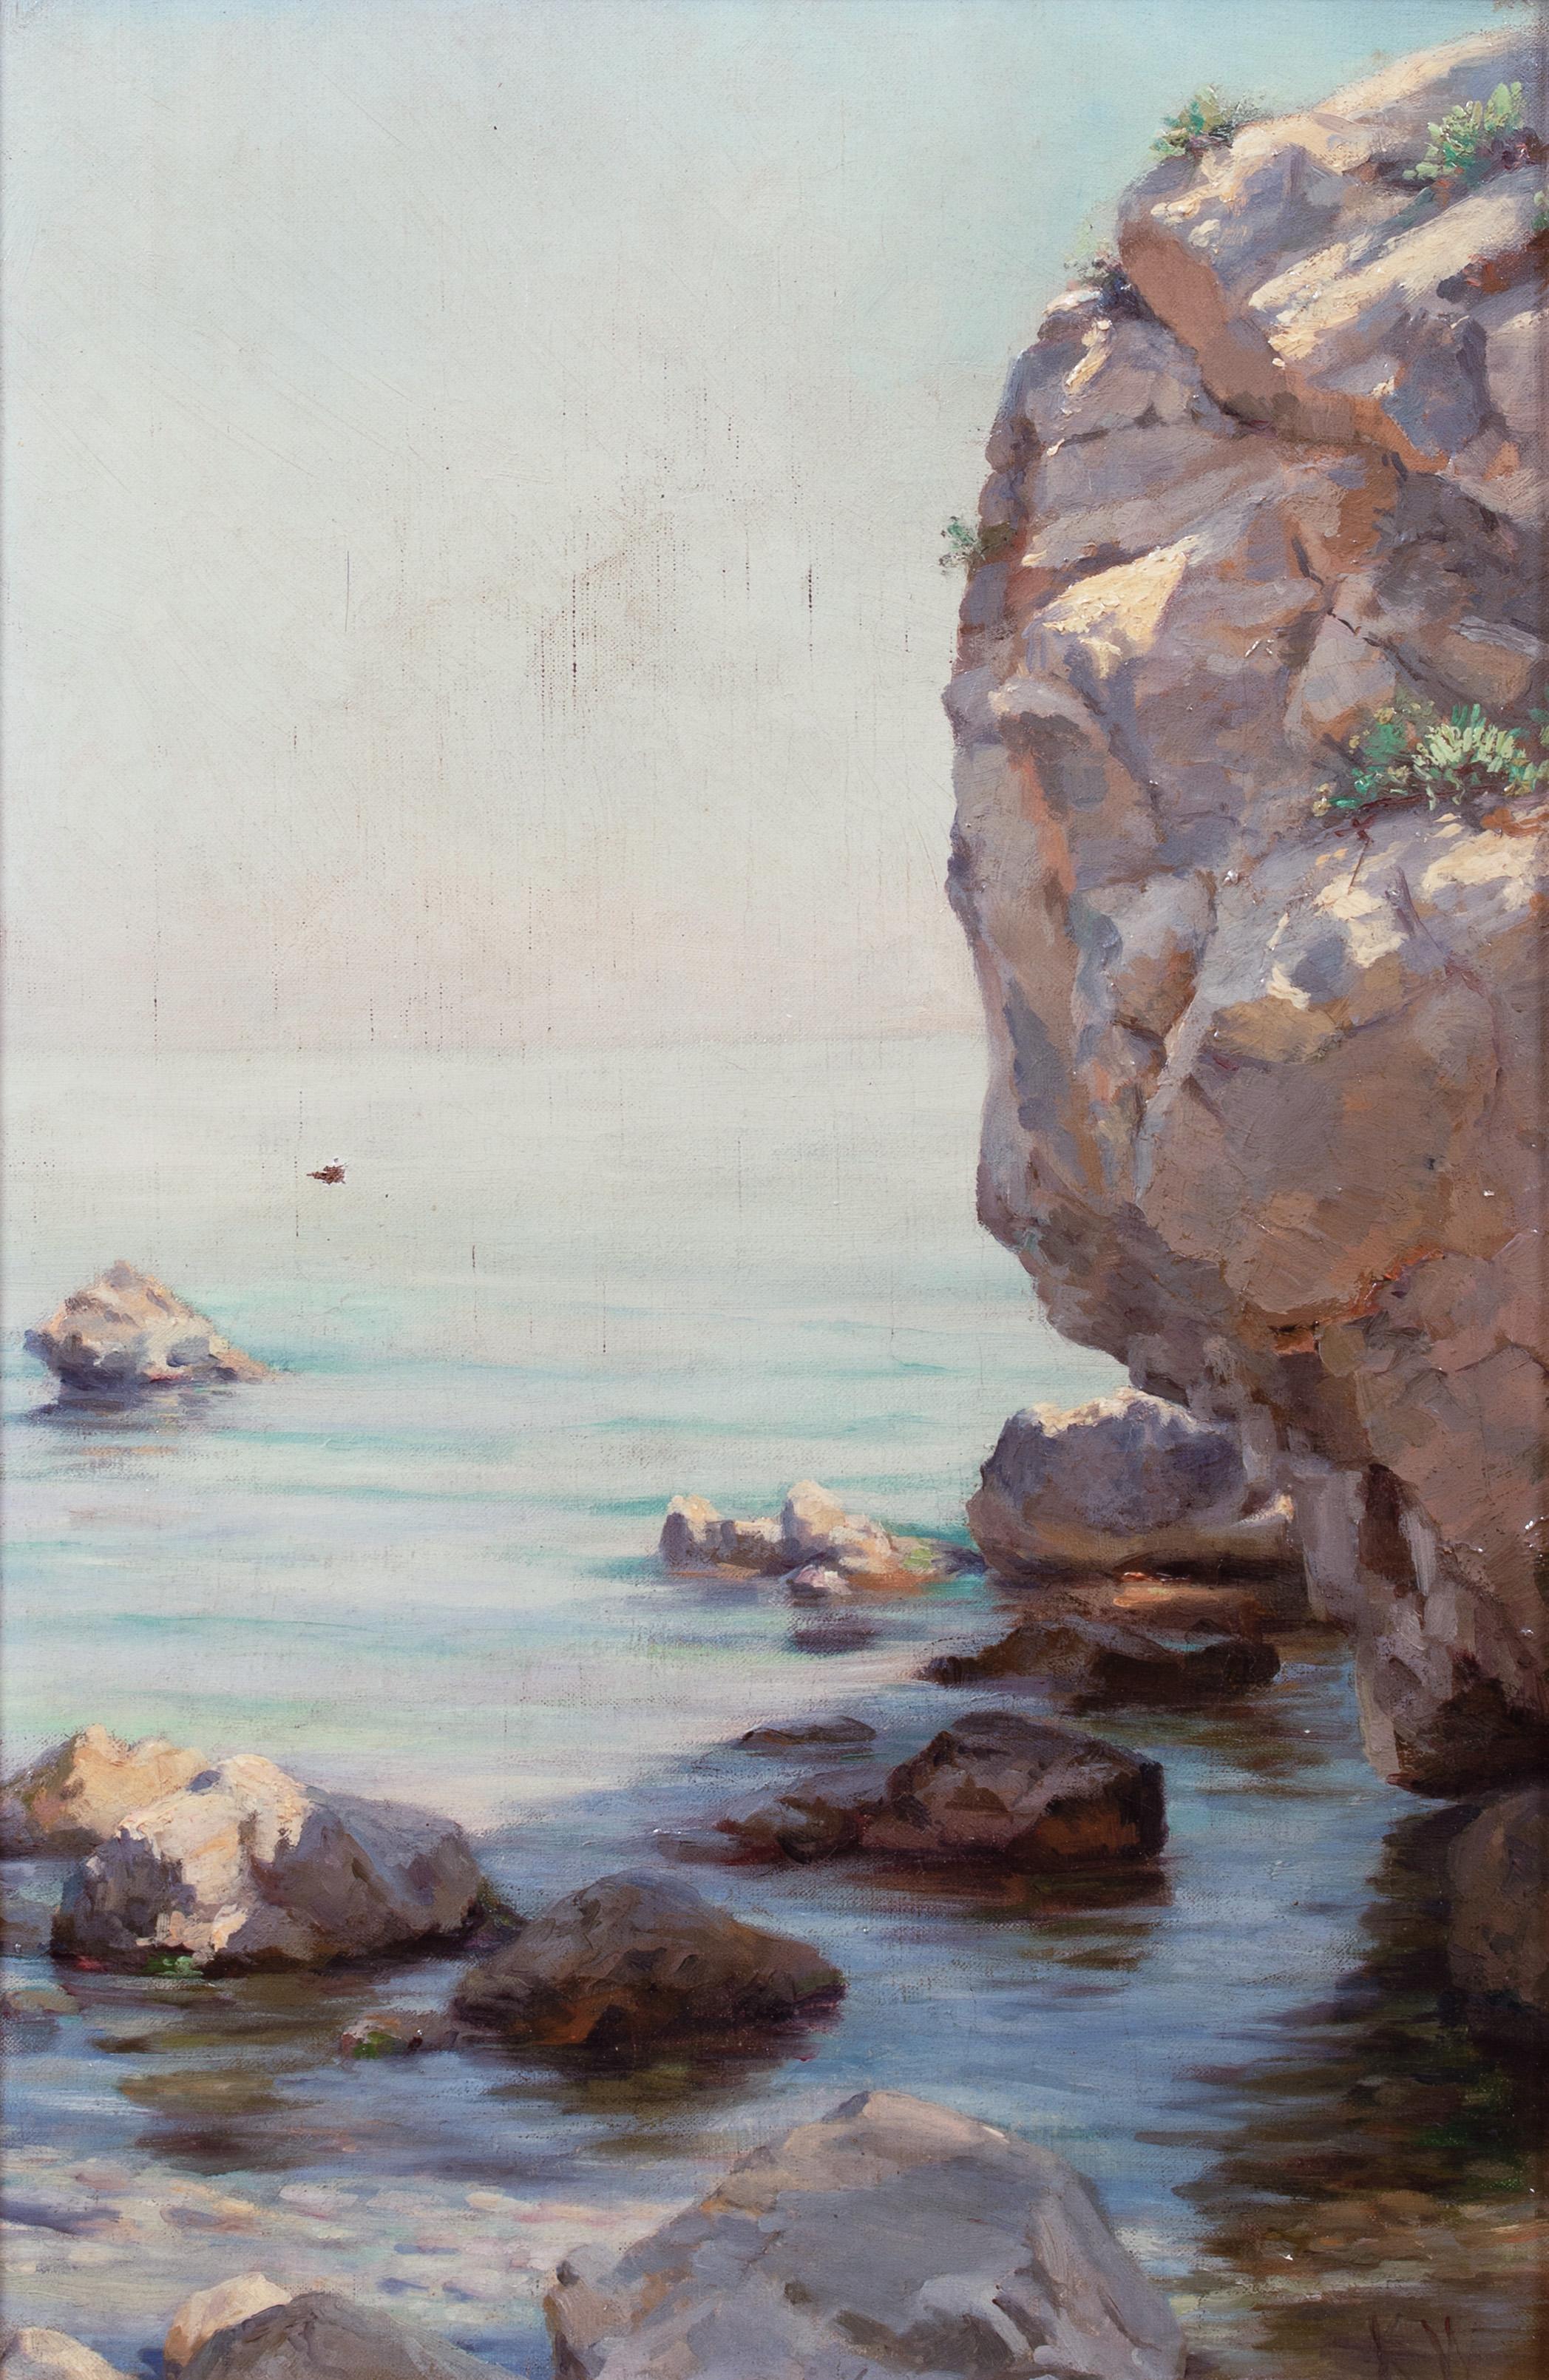 A Rocky Cornish Coast, early 20th Century - Painting by Kathleen Walker